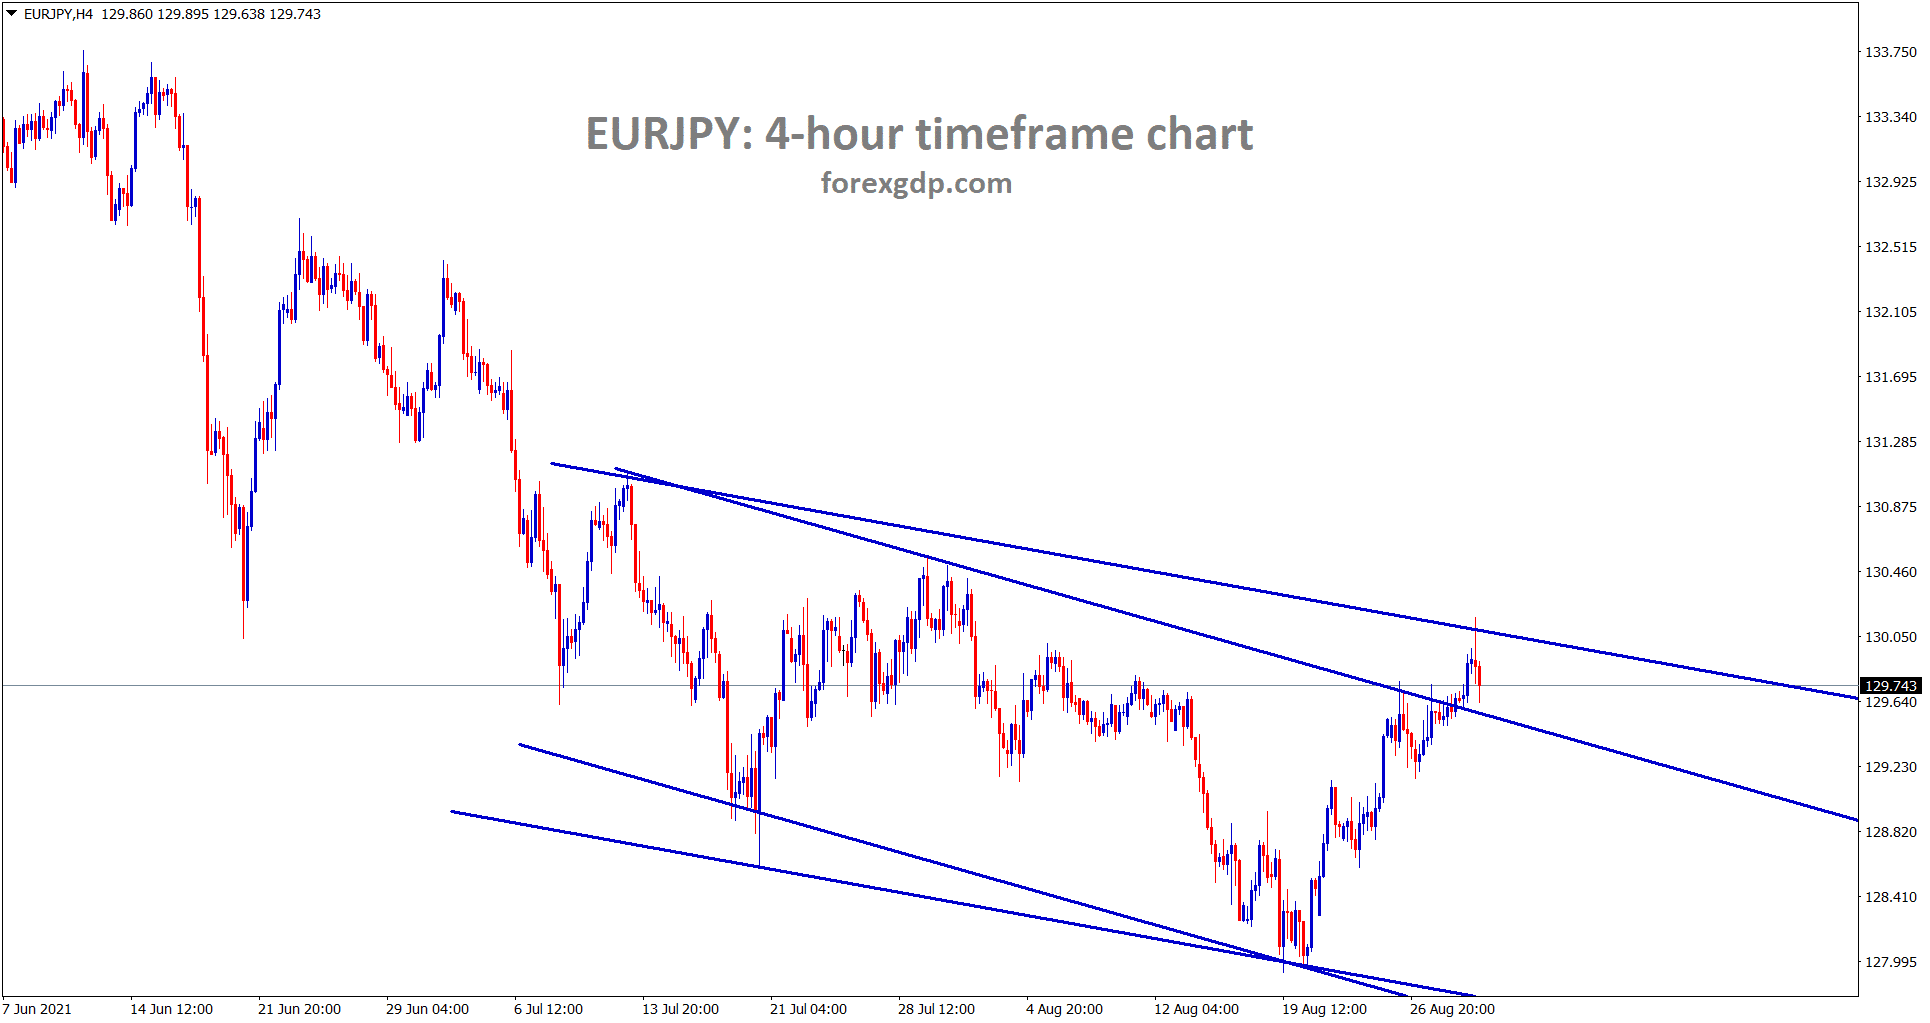 EURJPY is still at the lower high area of the descending channel wait for breakout or reversal